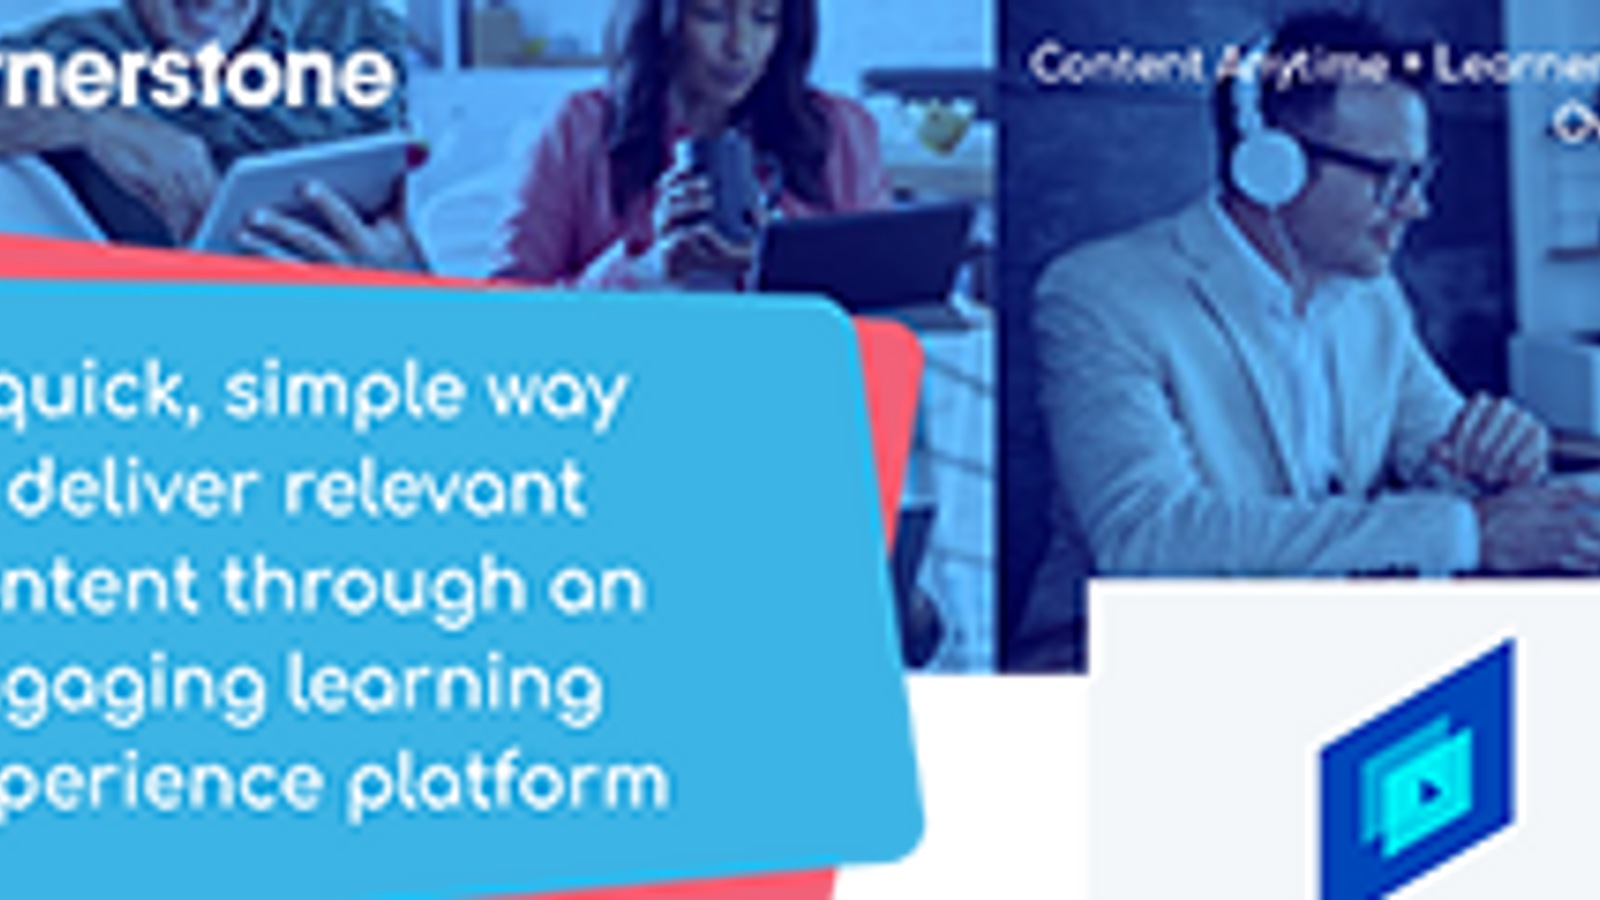 A quick, simple way to deliver relevant content through an engaging learning experience platform